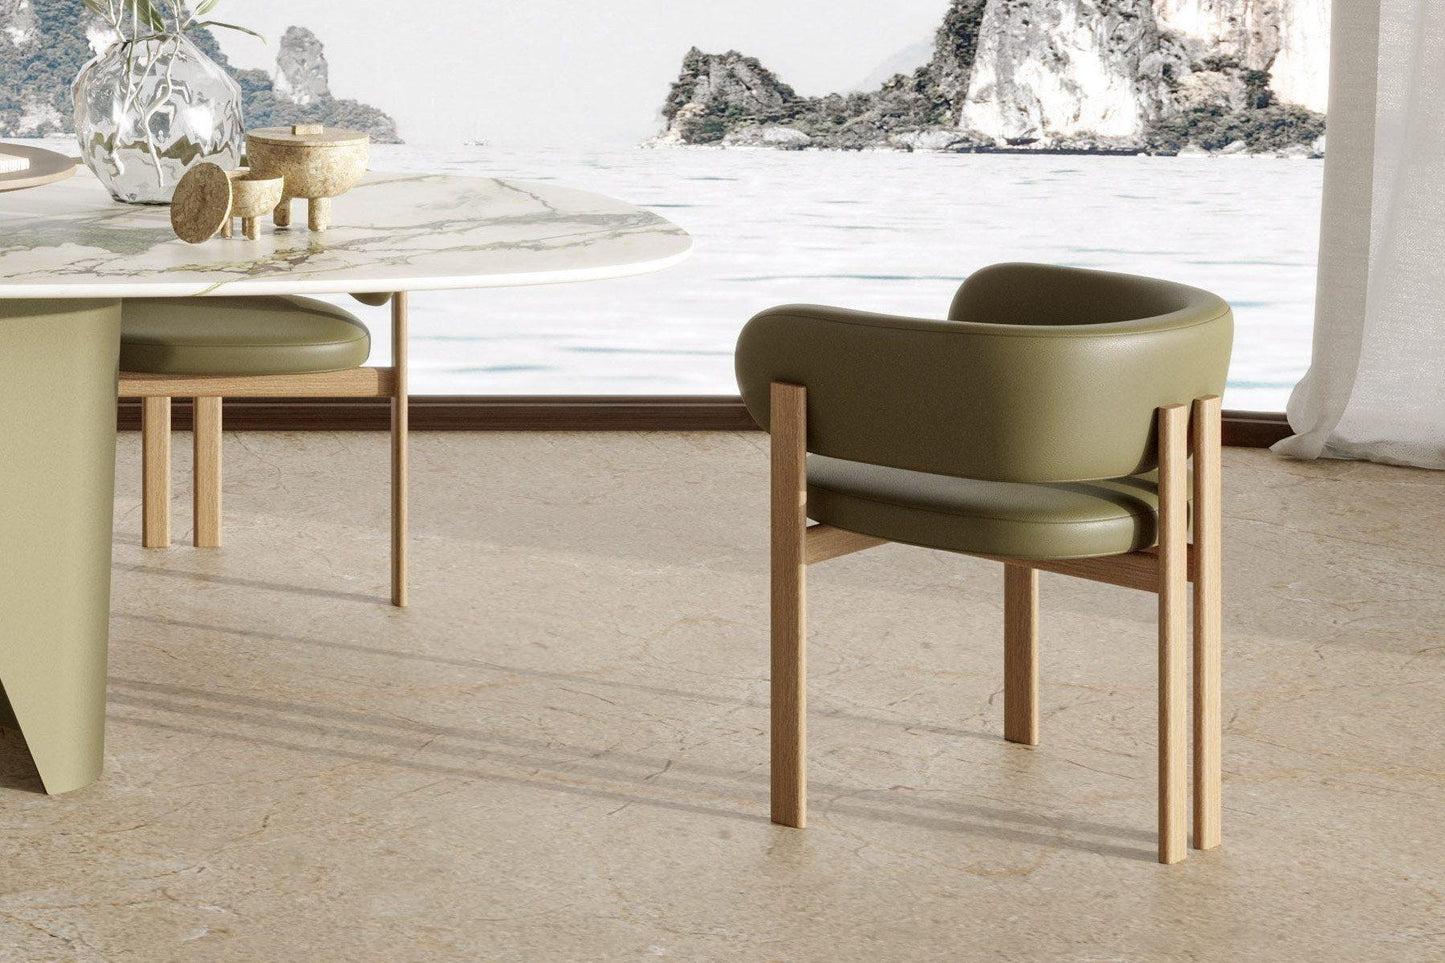 BAY WOOD ARMCHAIR by NATUREDESIGN